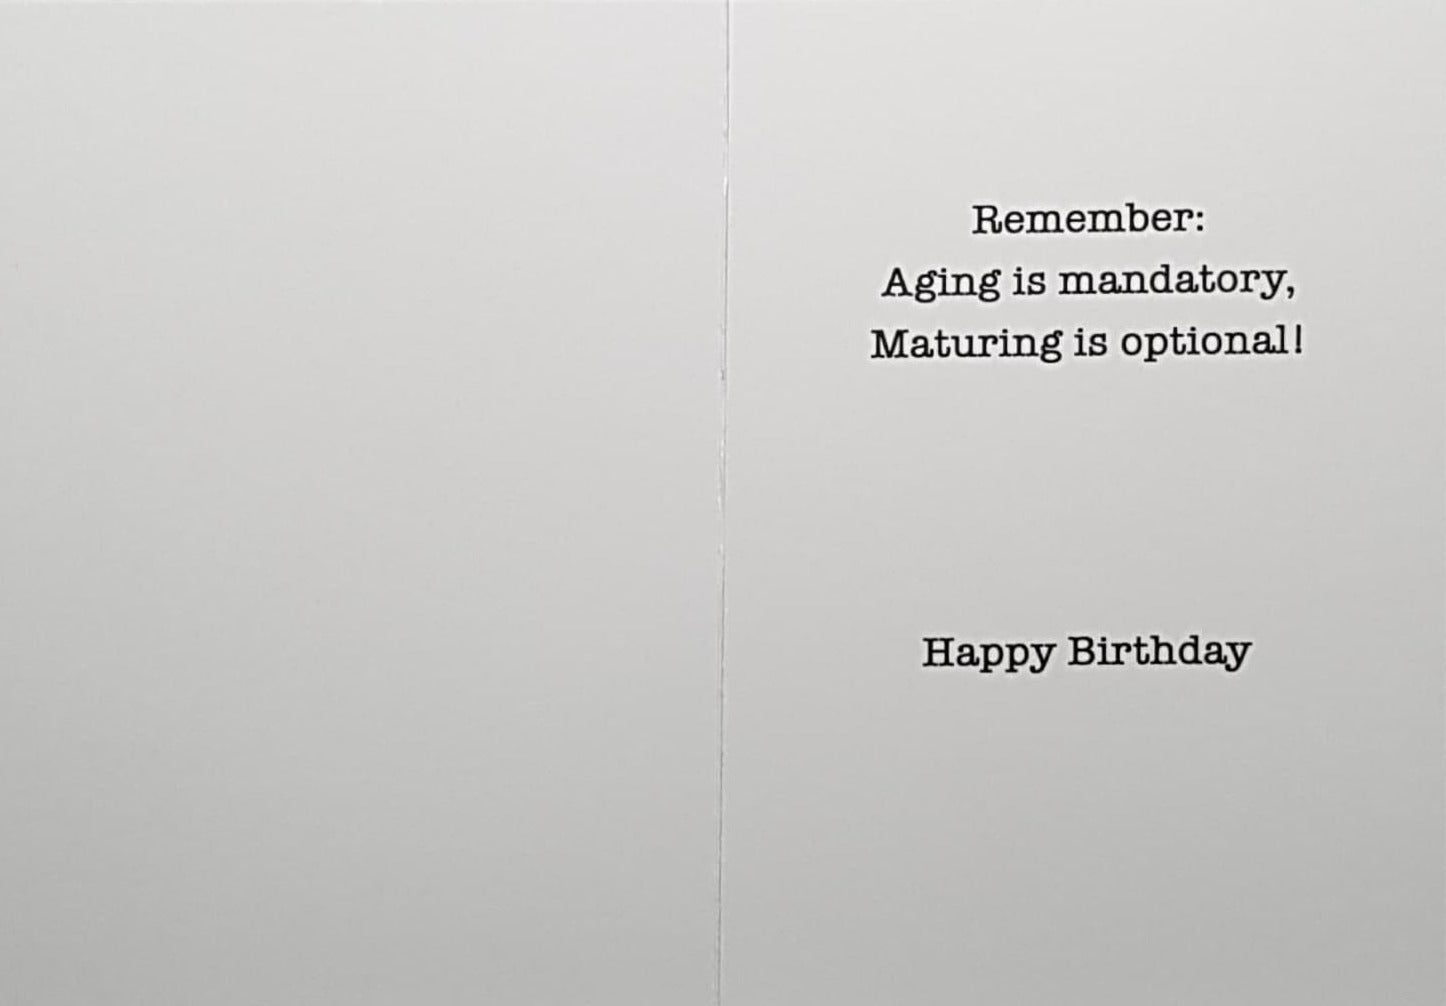 Birthday Card - Aging Is Mandatory, Maturing Is Optional!